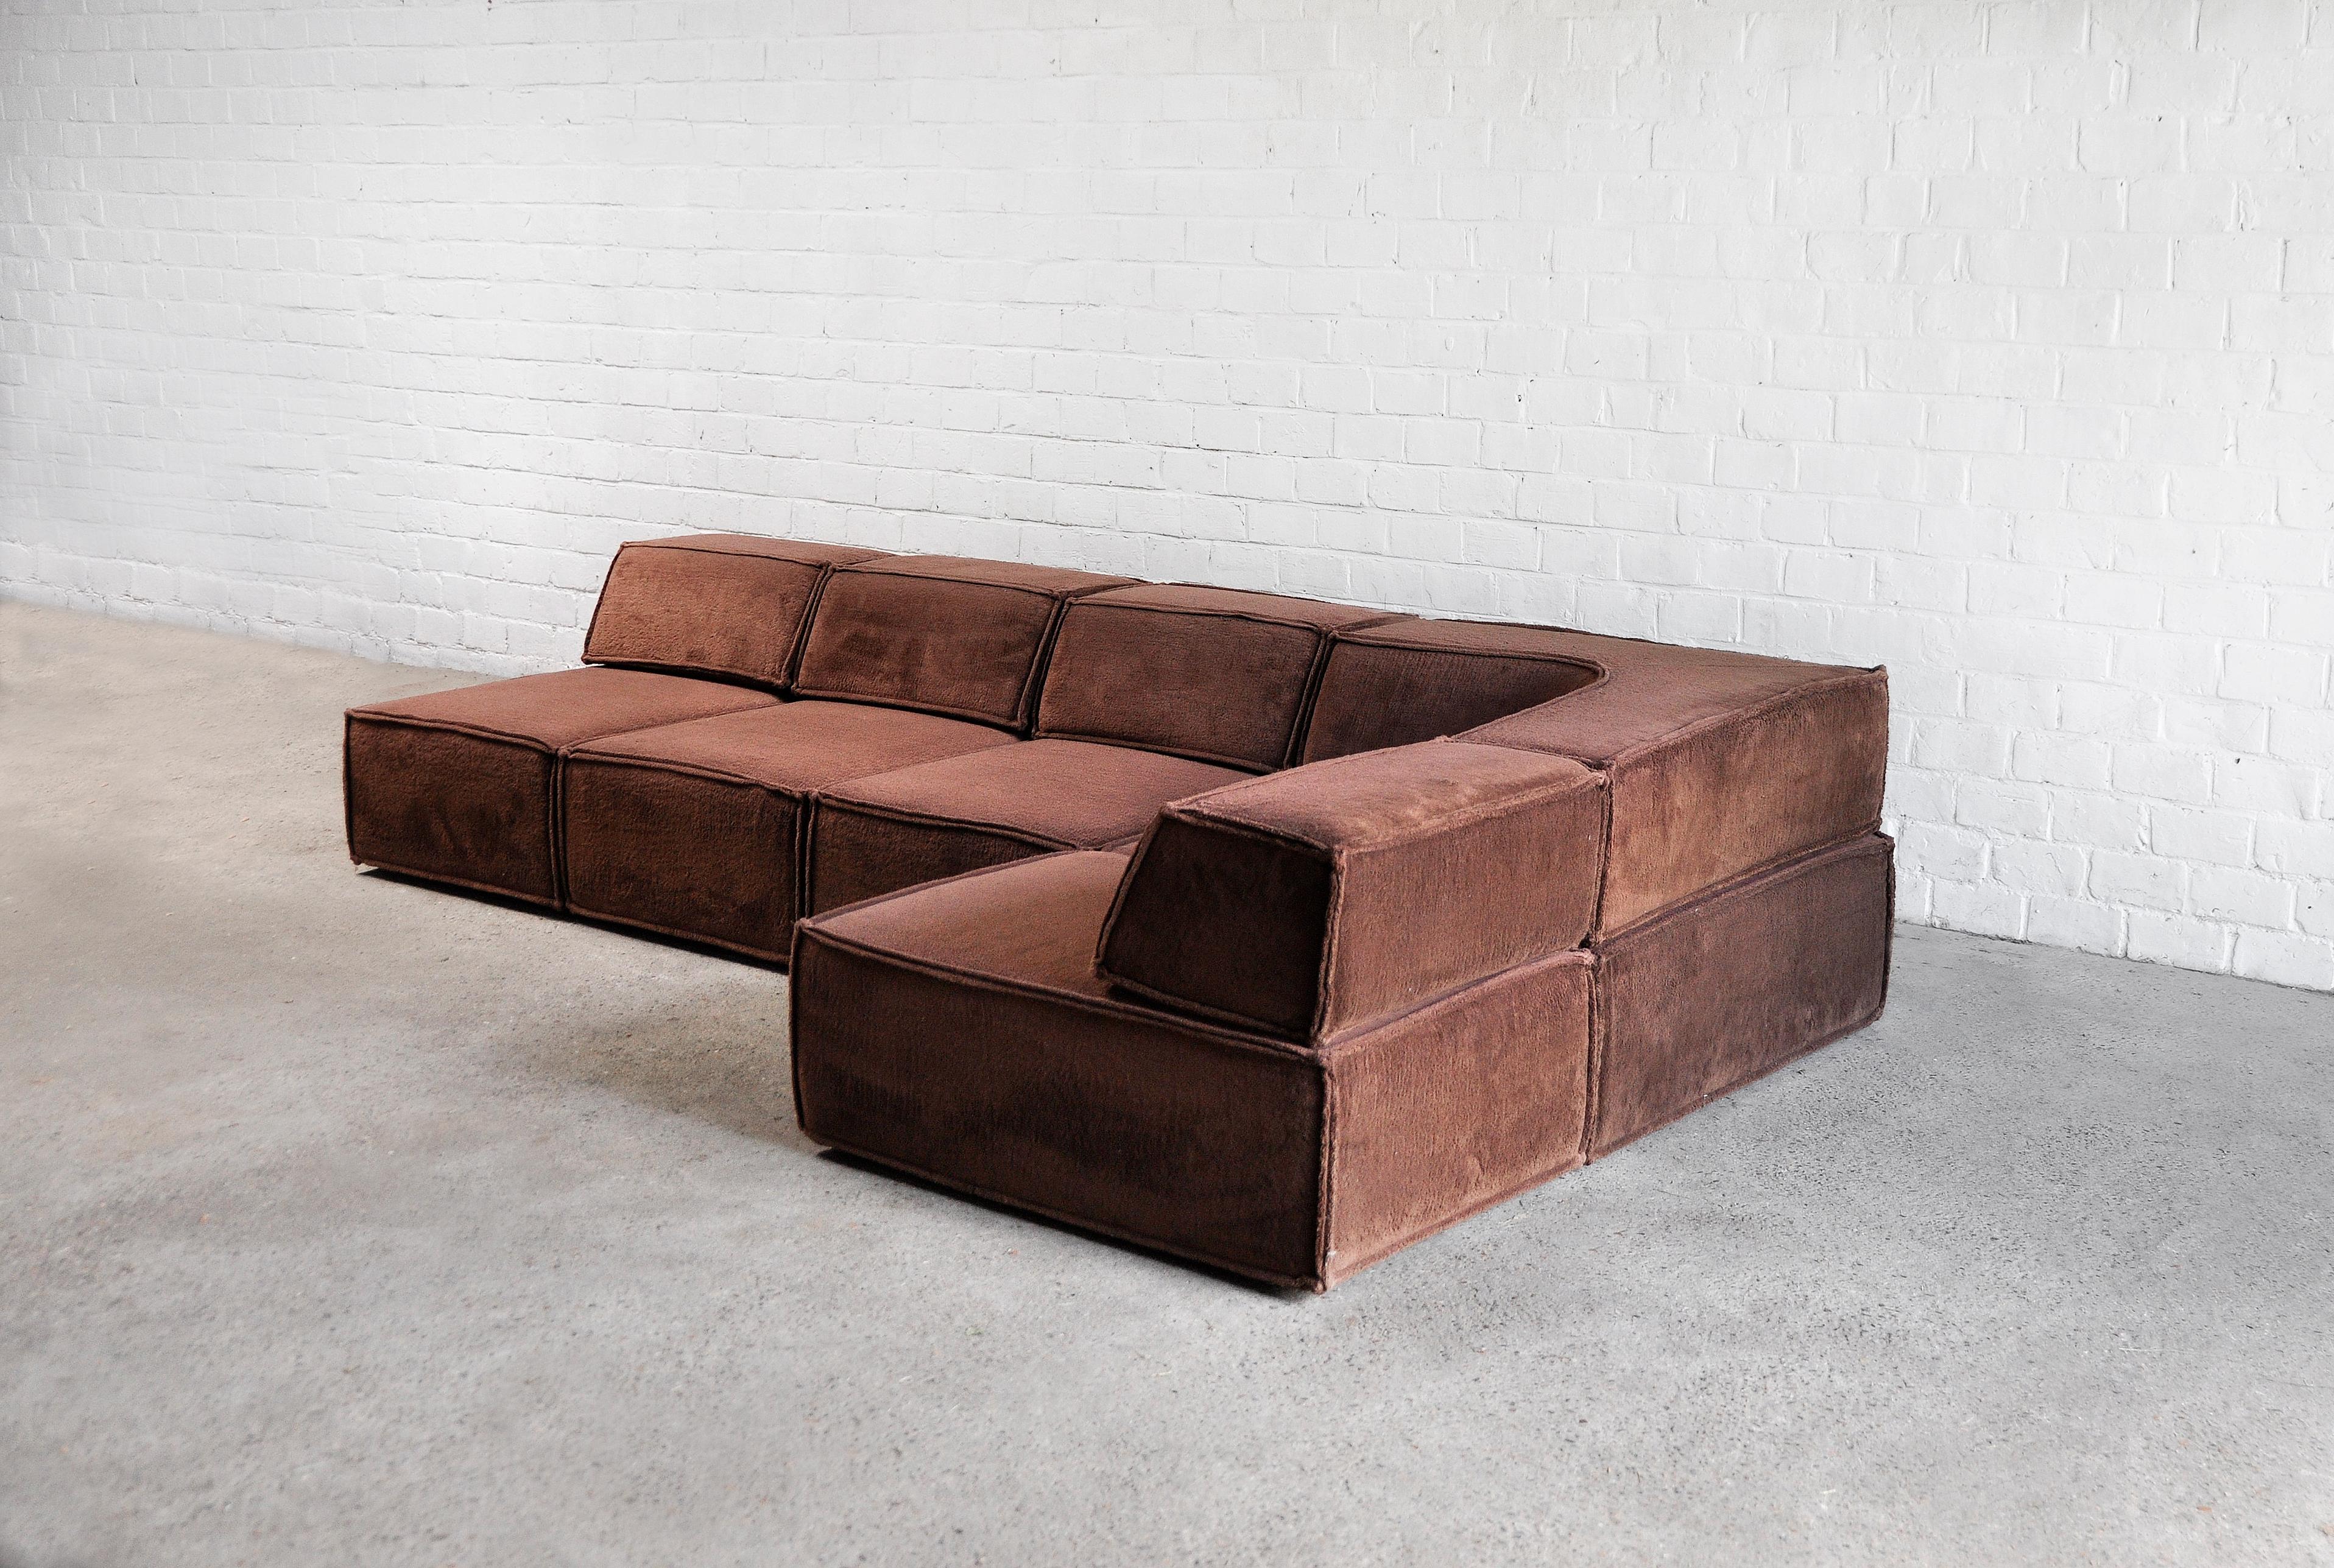 Late 20th Century Vintage Modular 'Trio' Sofa from COR In Brown Teddy, 1973